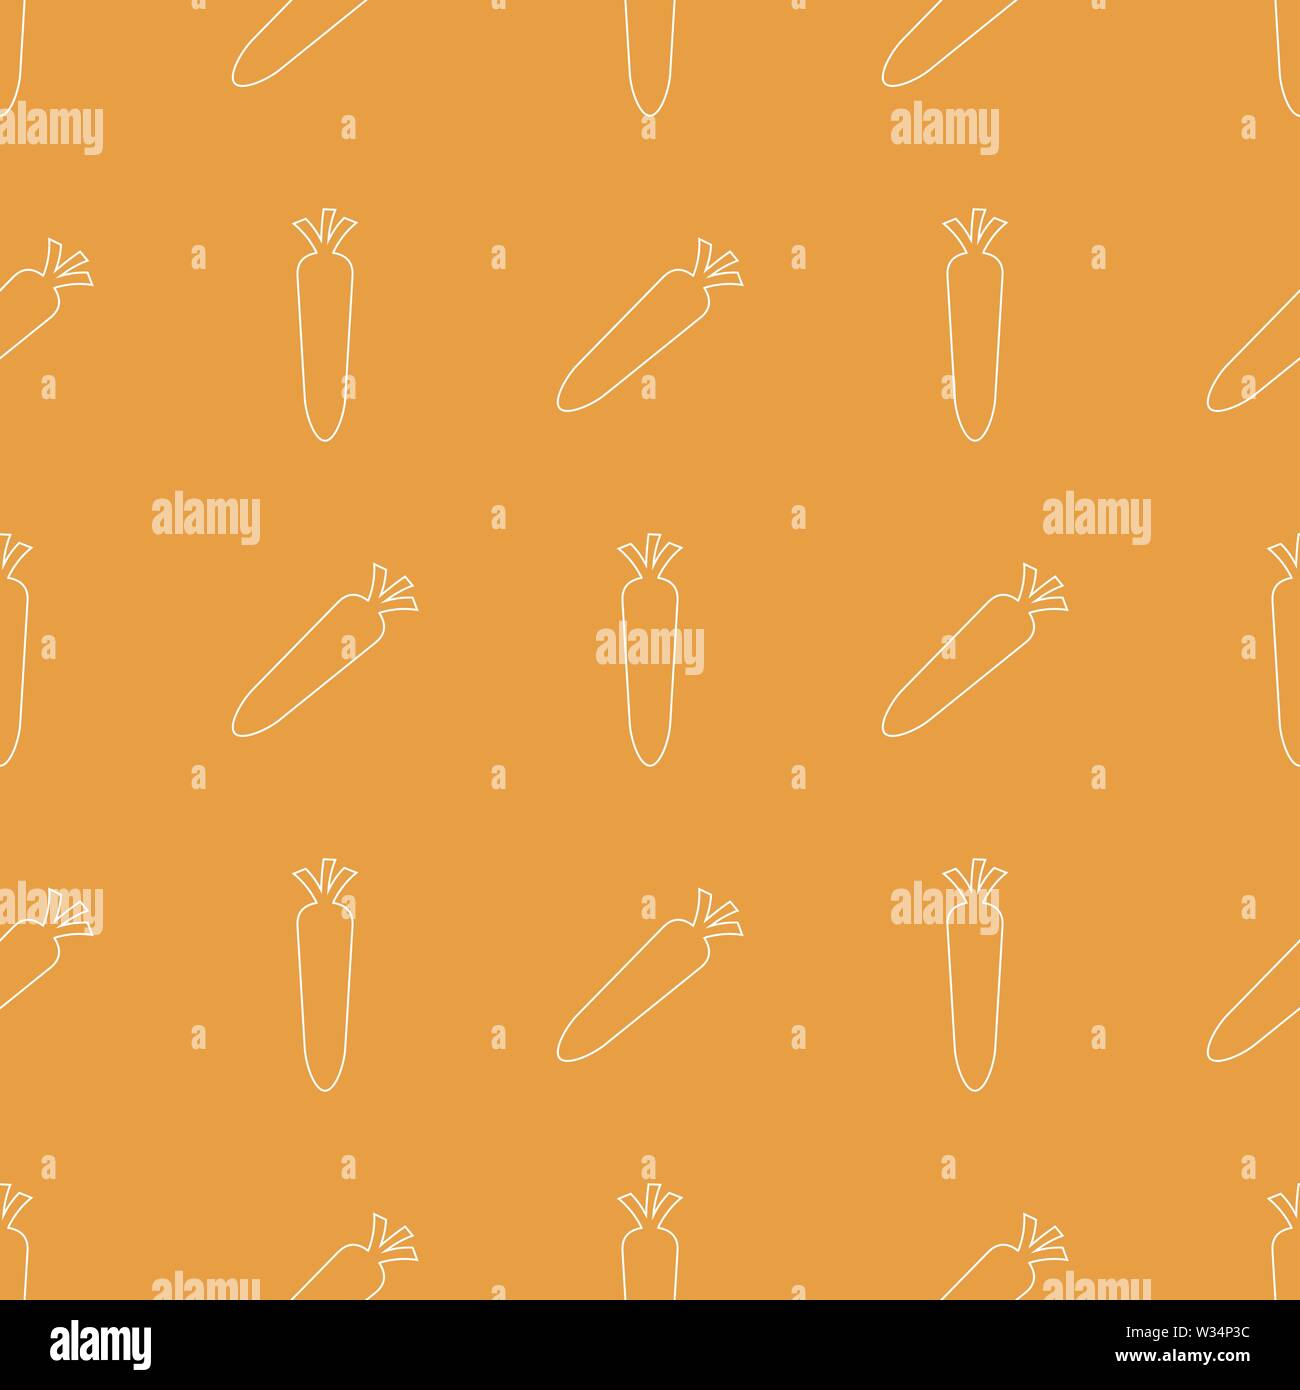 Seamless pattern with line style icon of carrot on orange background. Vector illustration for design, web, wrapping paper, fabric, wallpaper. Stock Vector